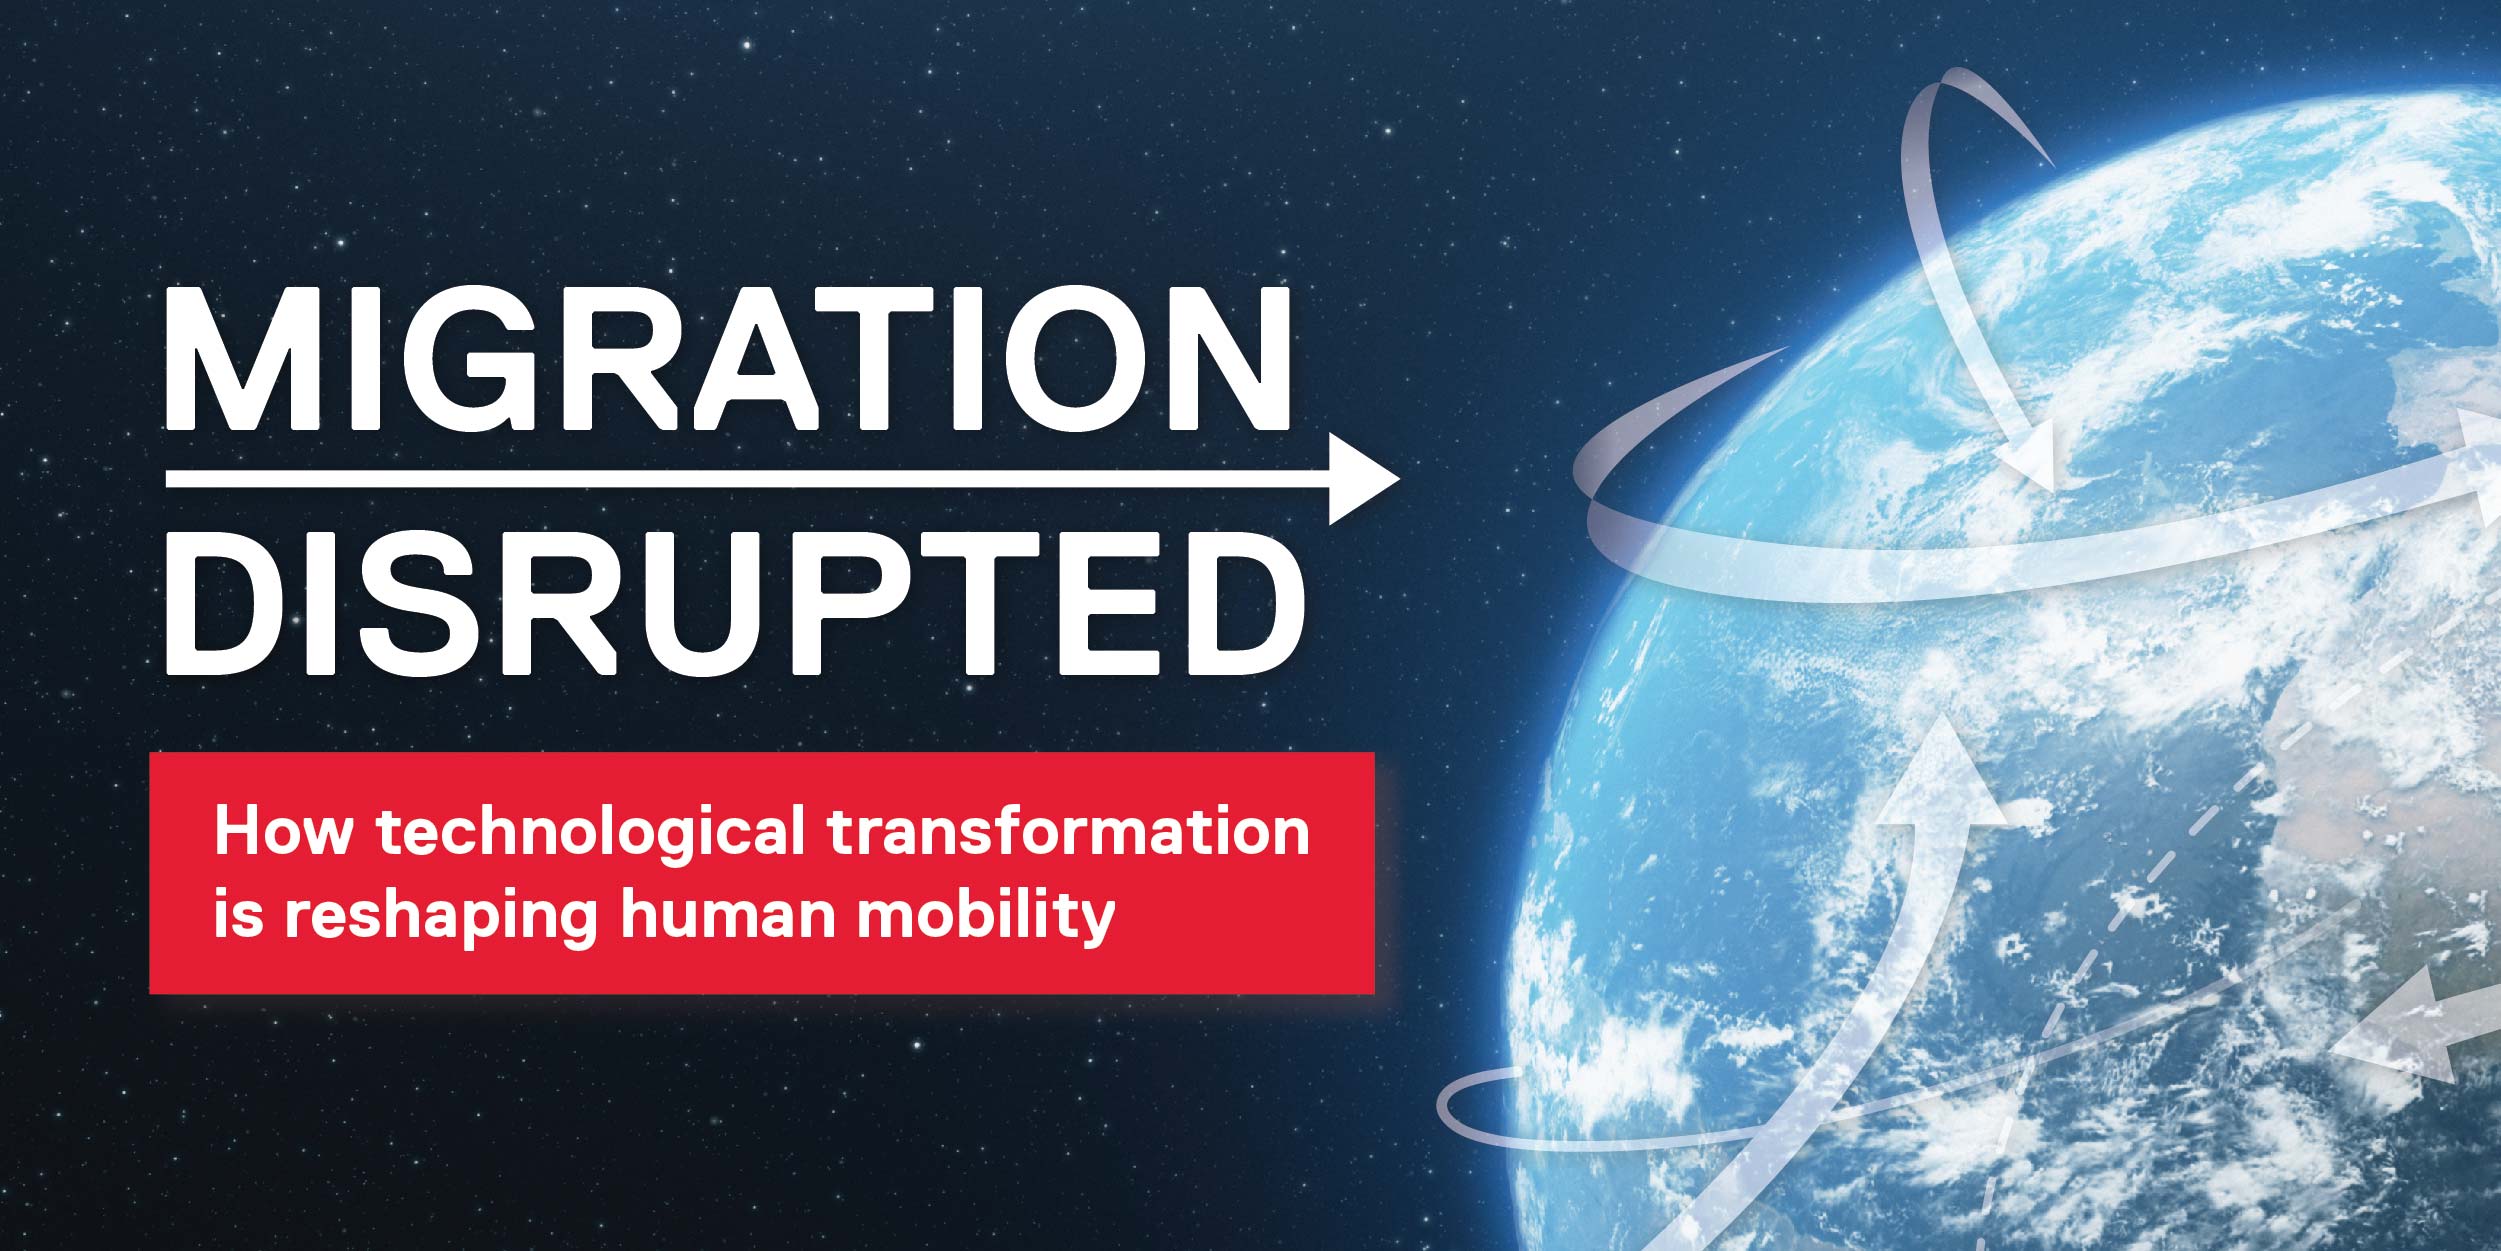 Migration Disrupted. How technological transformation is reshaping human mobility